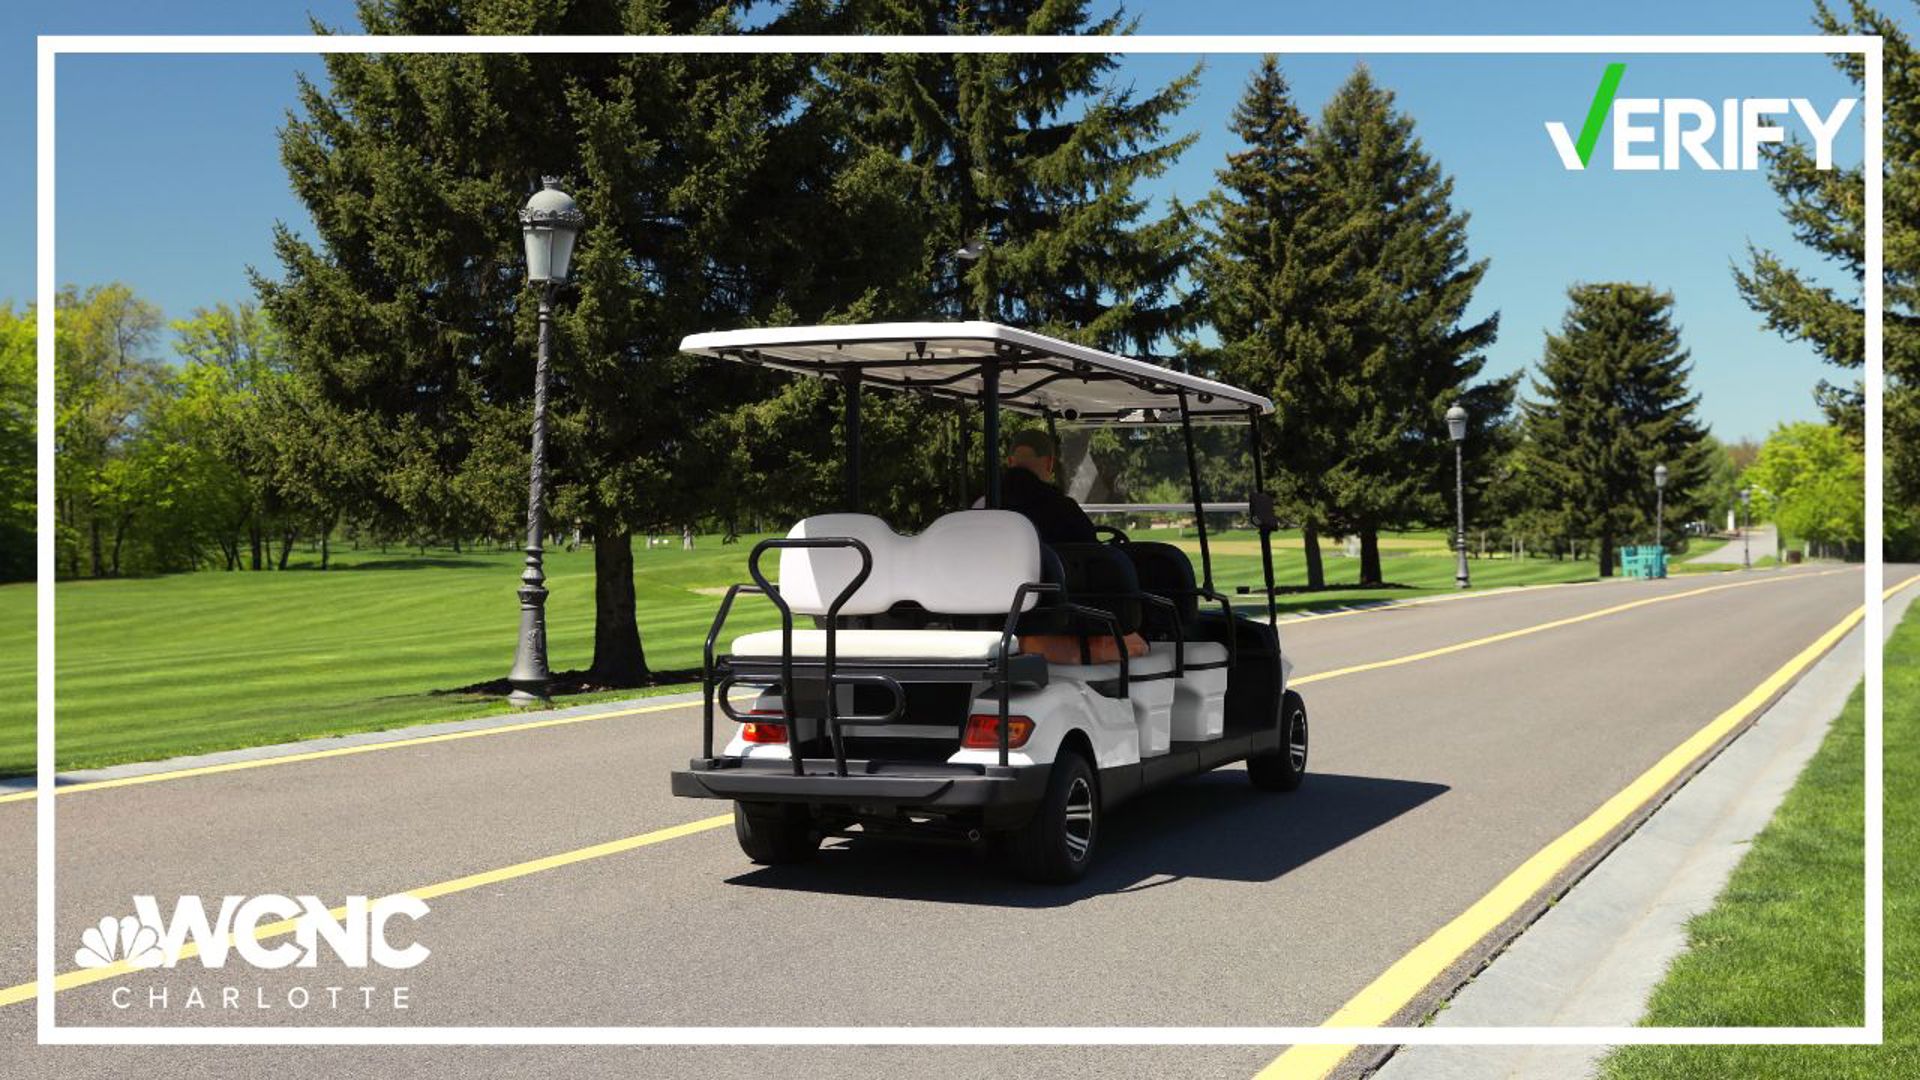 As the weather gets nicer in the Carolinas, you might see more golf carts on the roads in North Carolina. Here's what the law says about who can drive them.